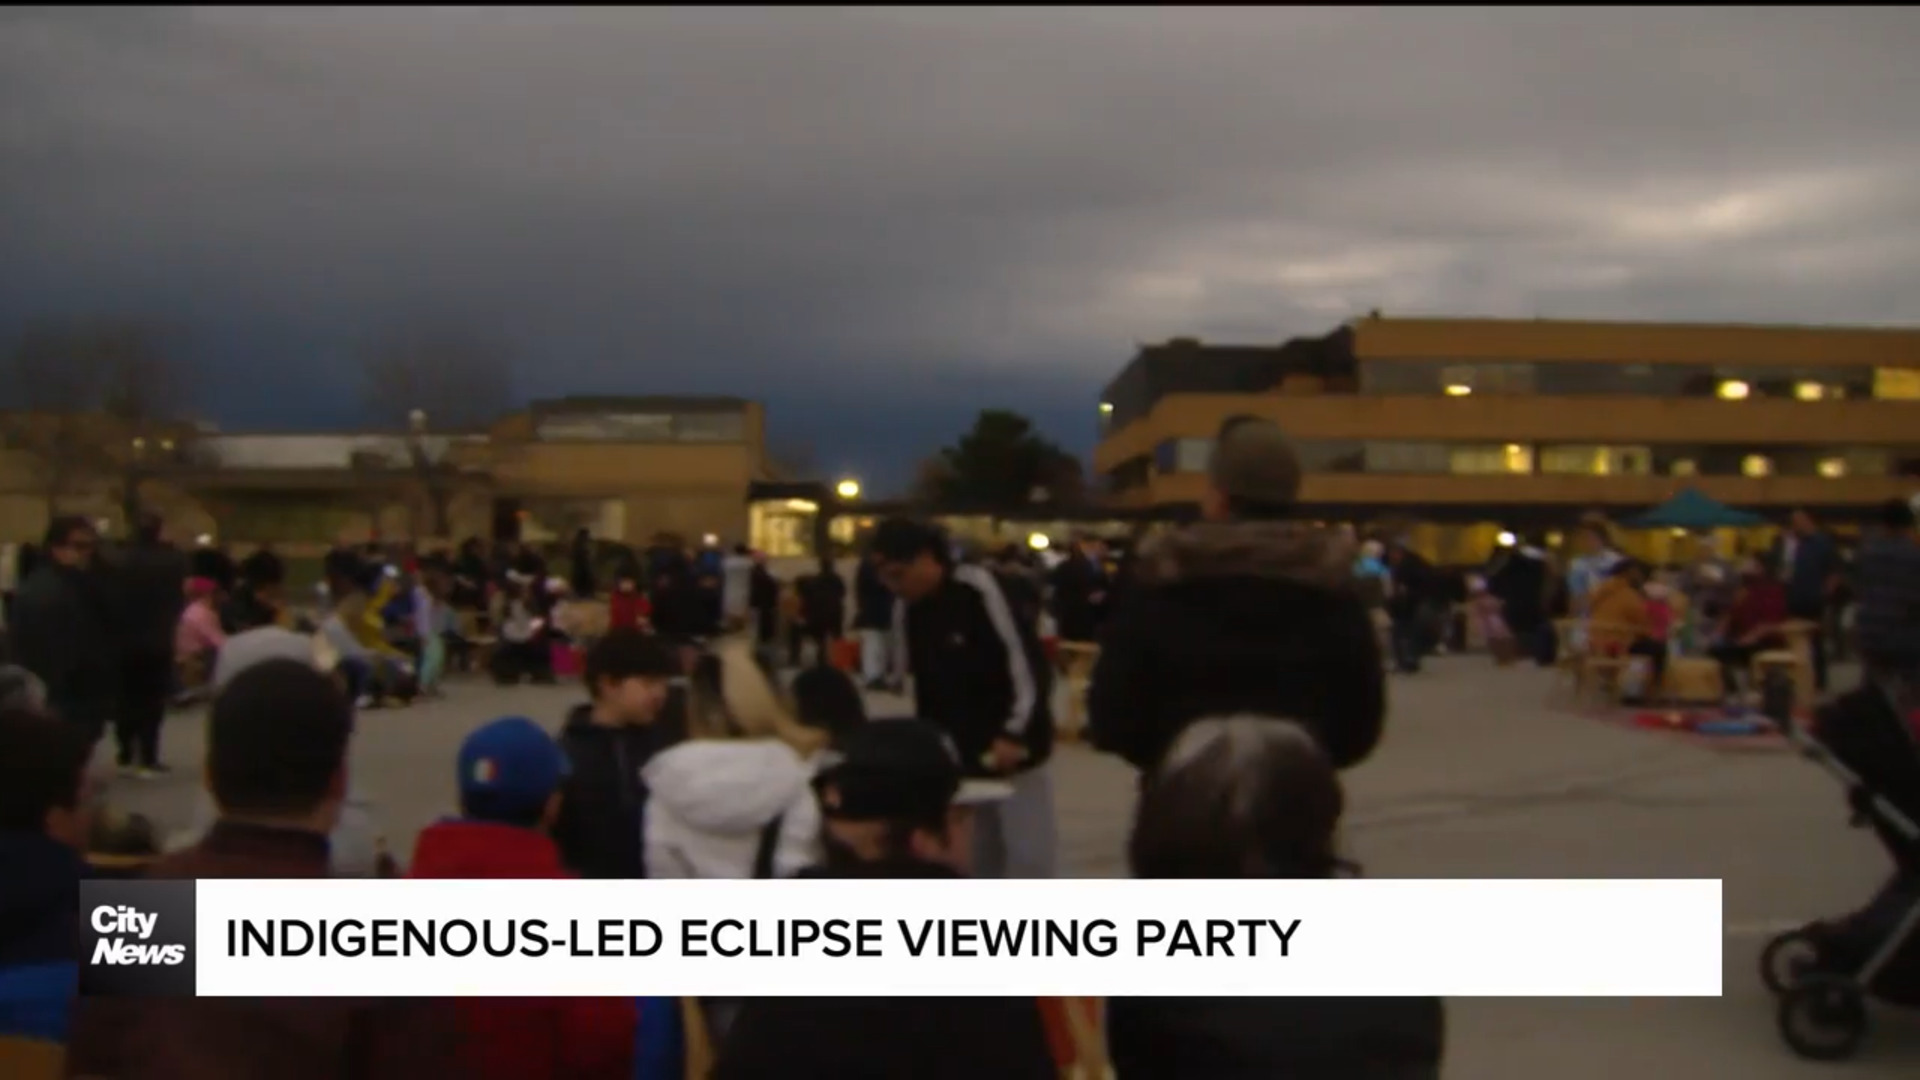 An Indigenous-led eclipse viewing party